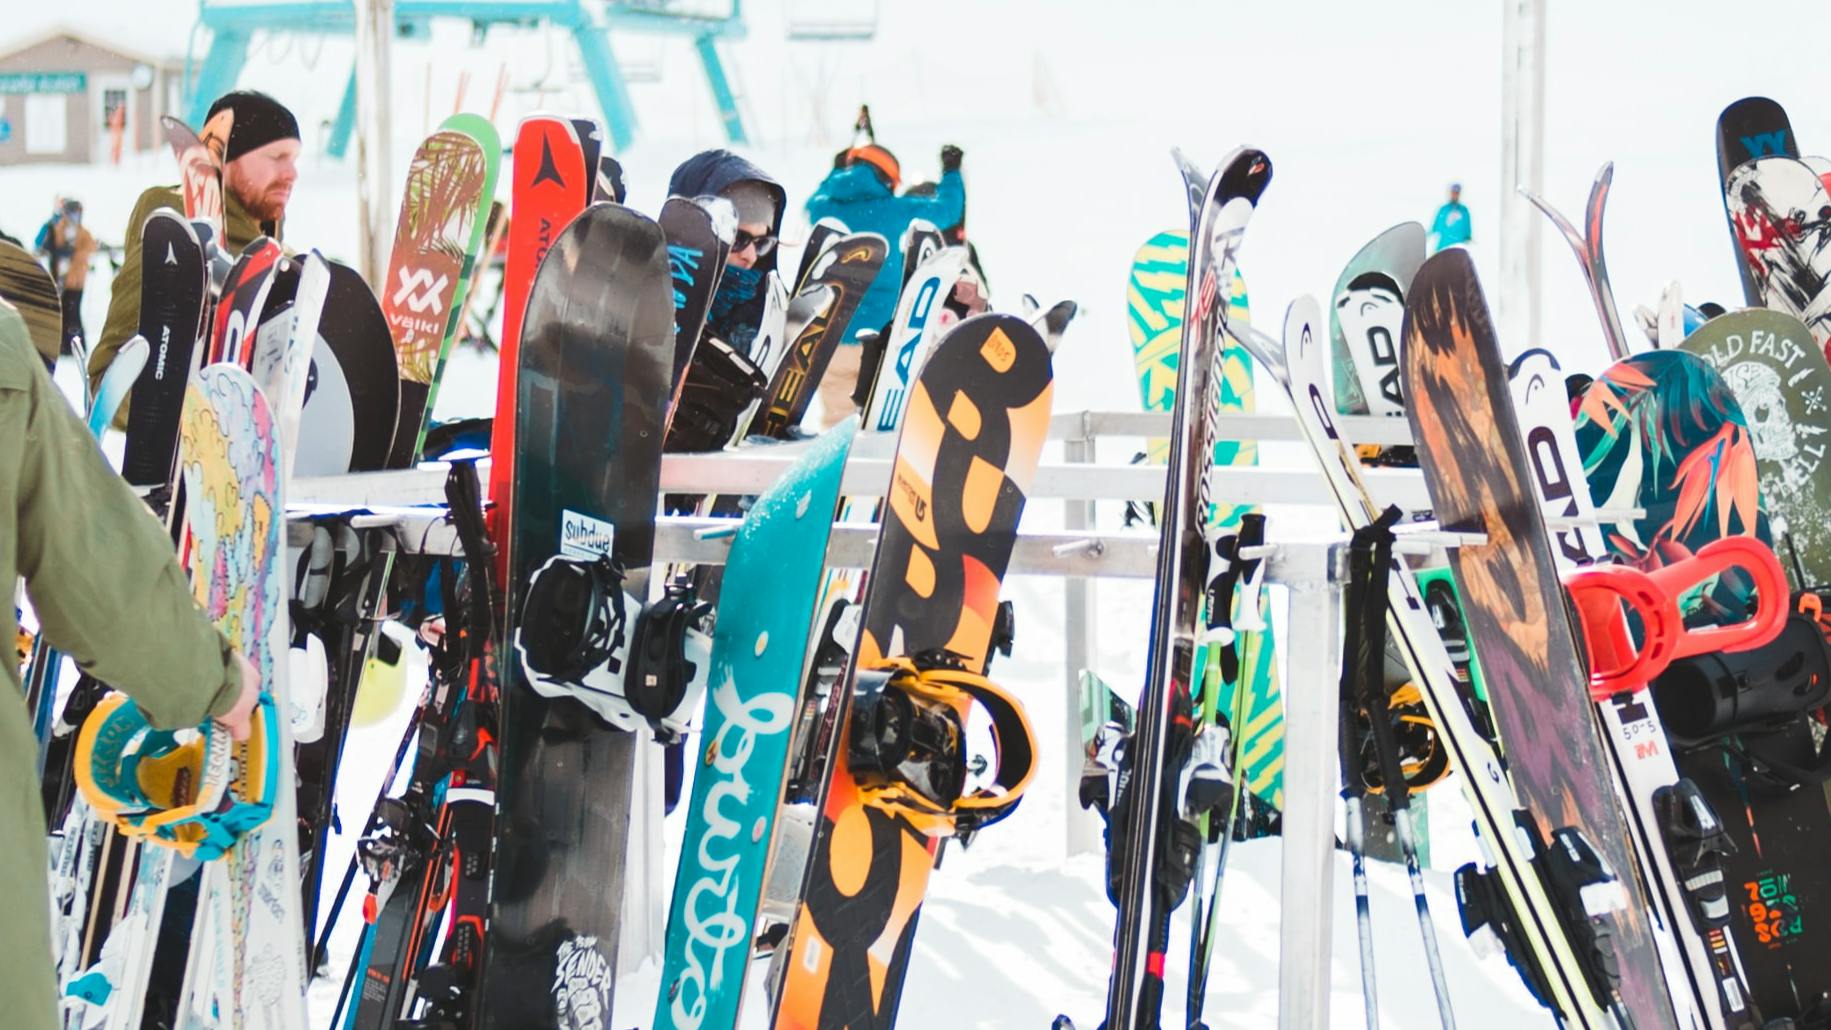 A rack of colorful snowboards and skis at a resort